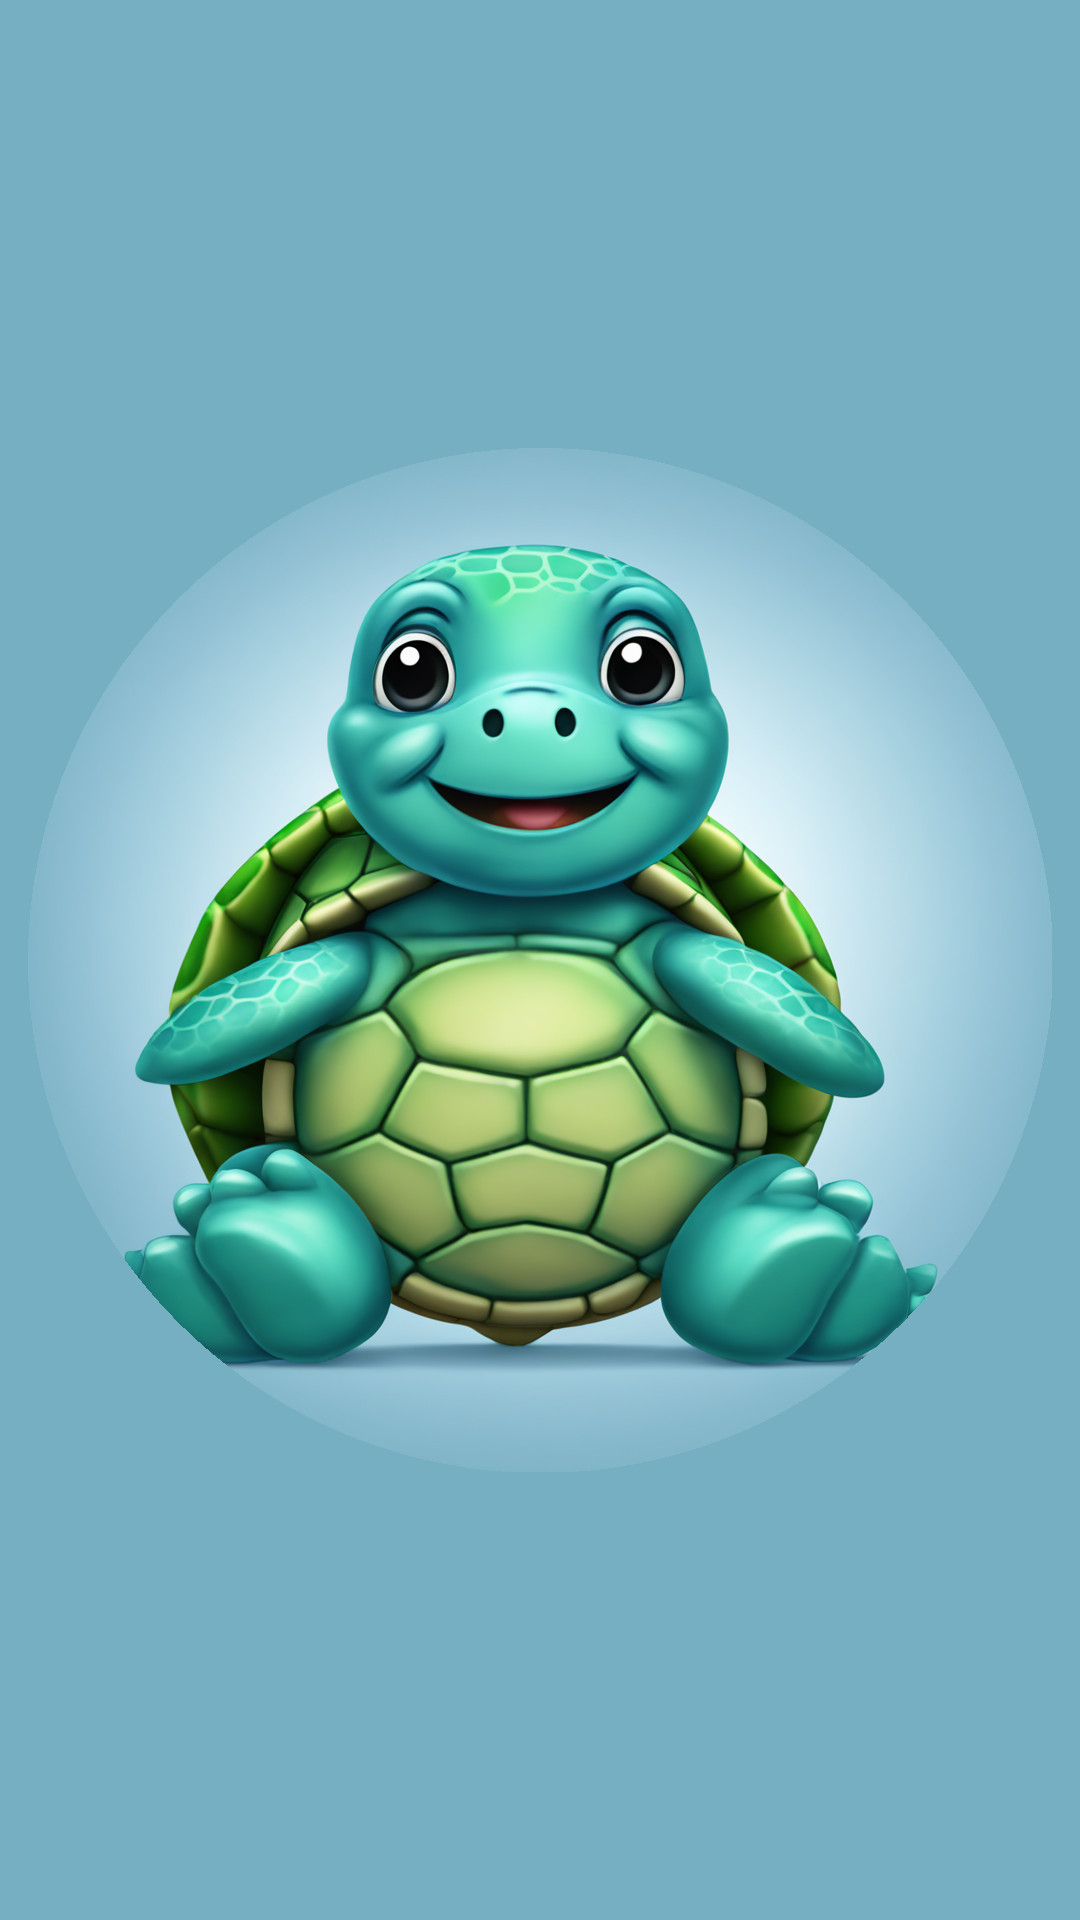 a green turtle sits on a blue teddy bear jpg file, in the style of realistic yet stylized, emotive faces, 2d game art, applecore, dotted, soft gradients